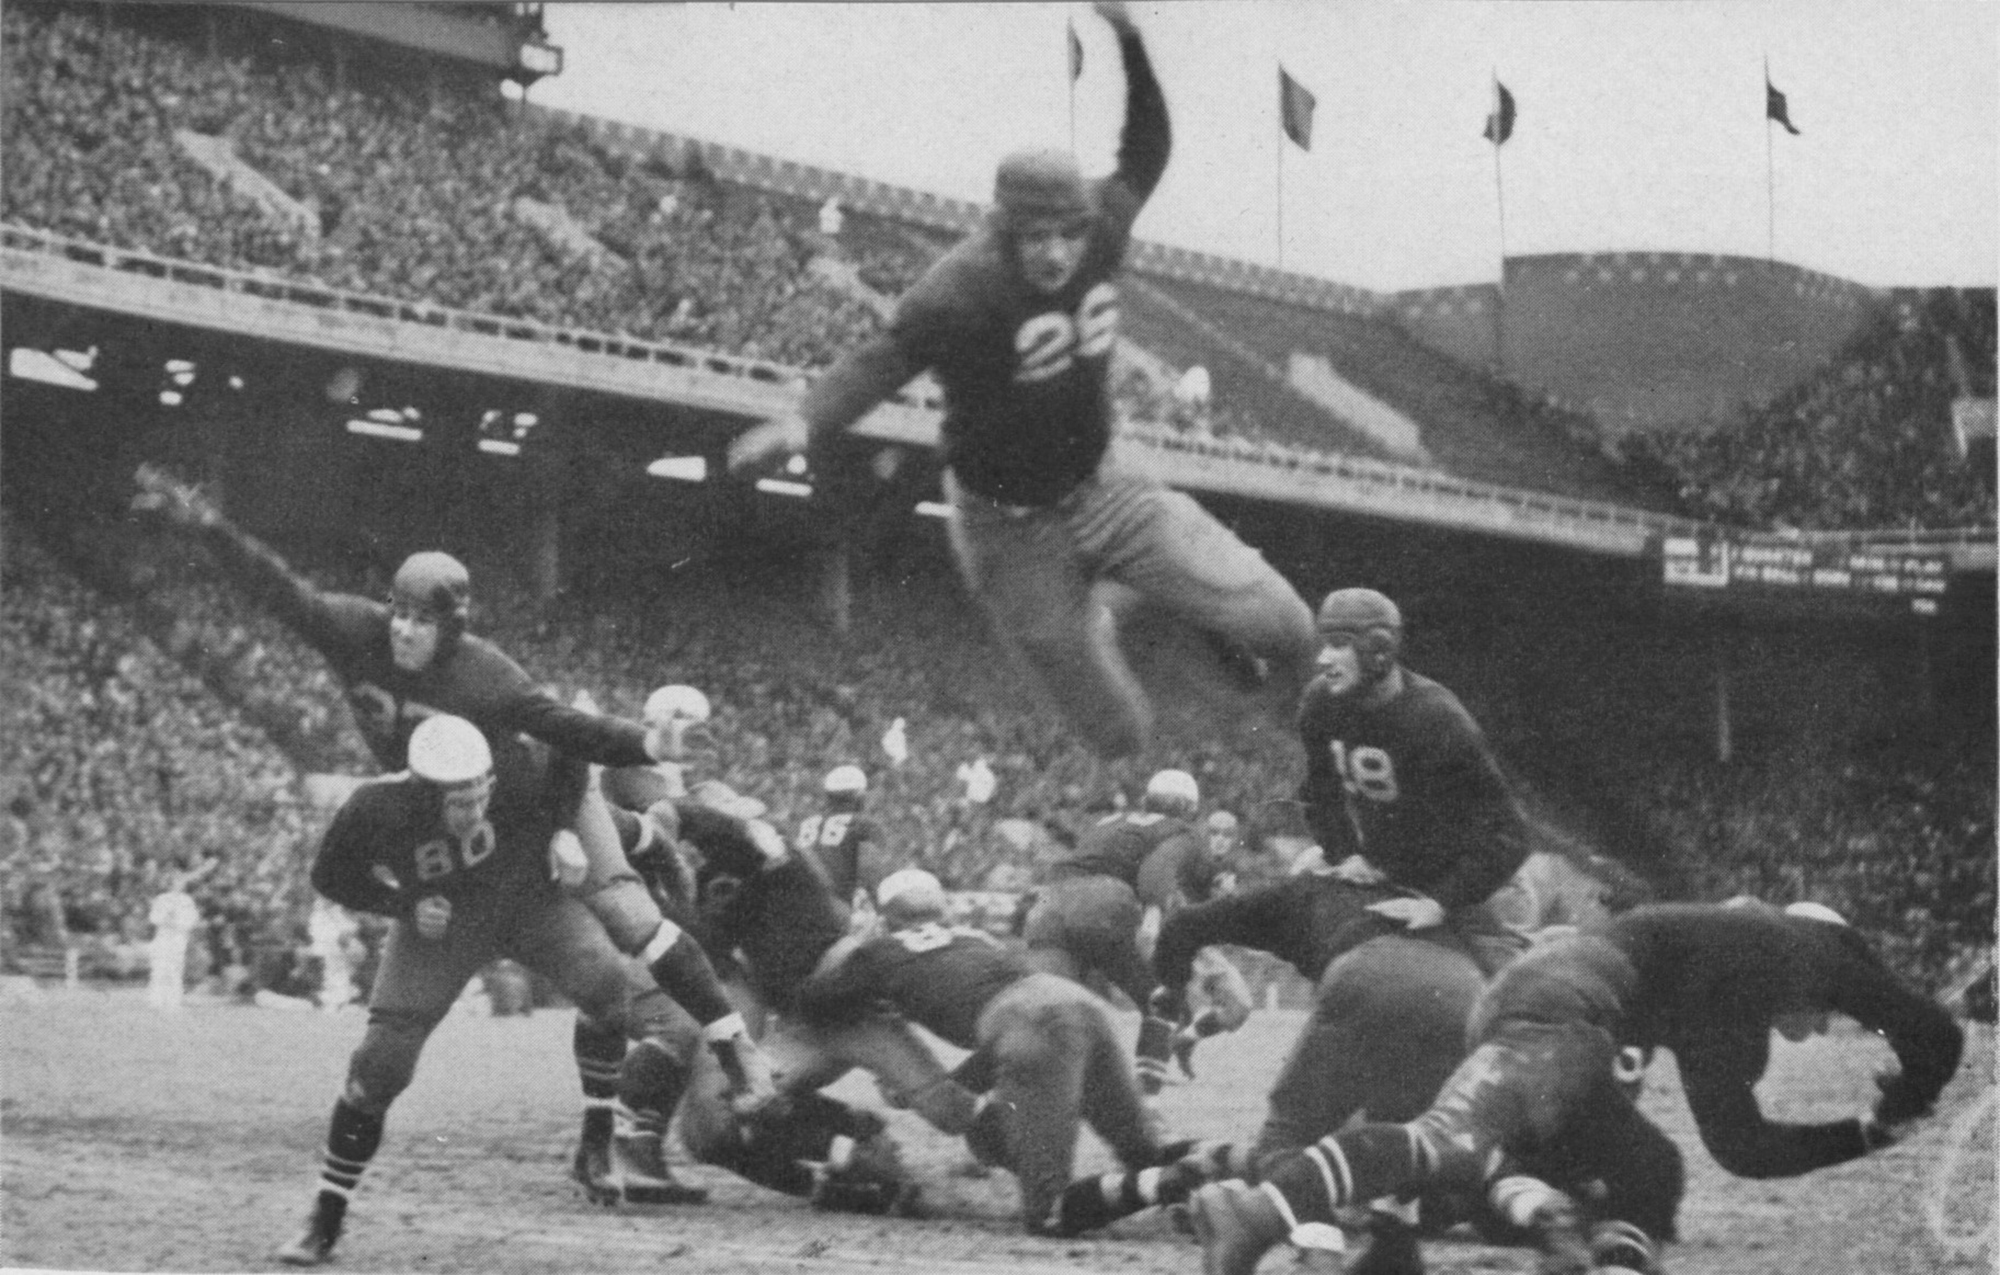 Penn takes on Cornell at Franklin Field in 1936.